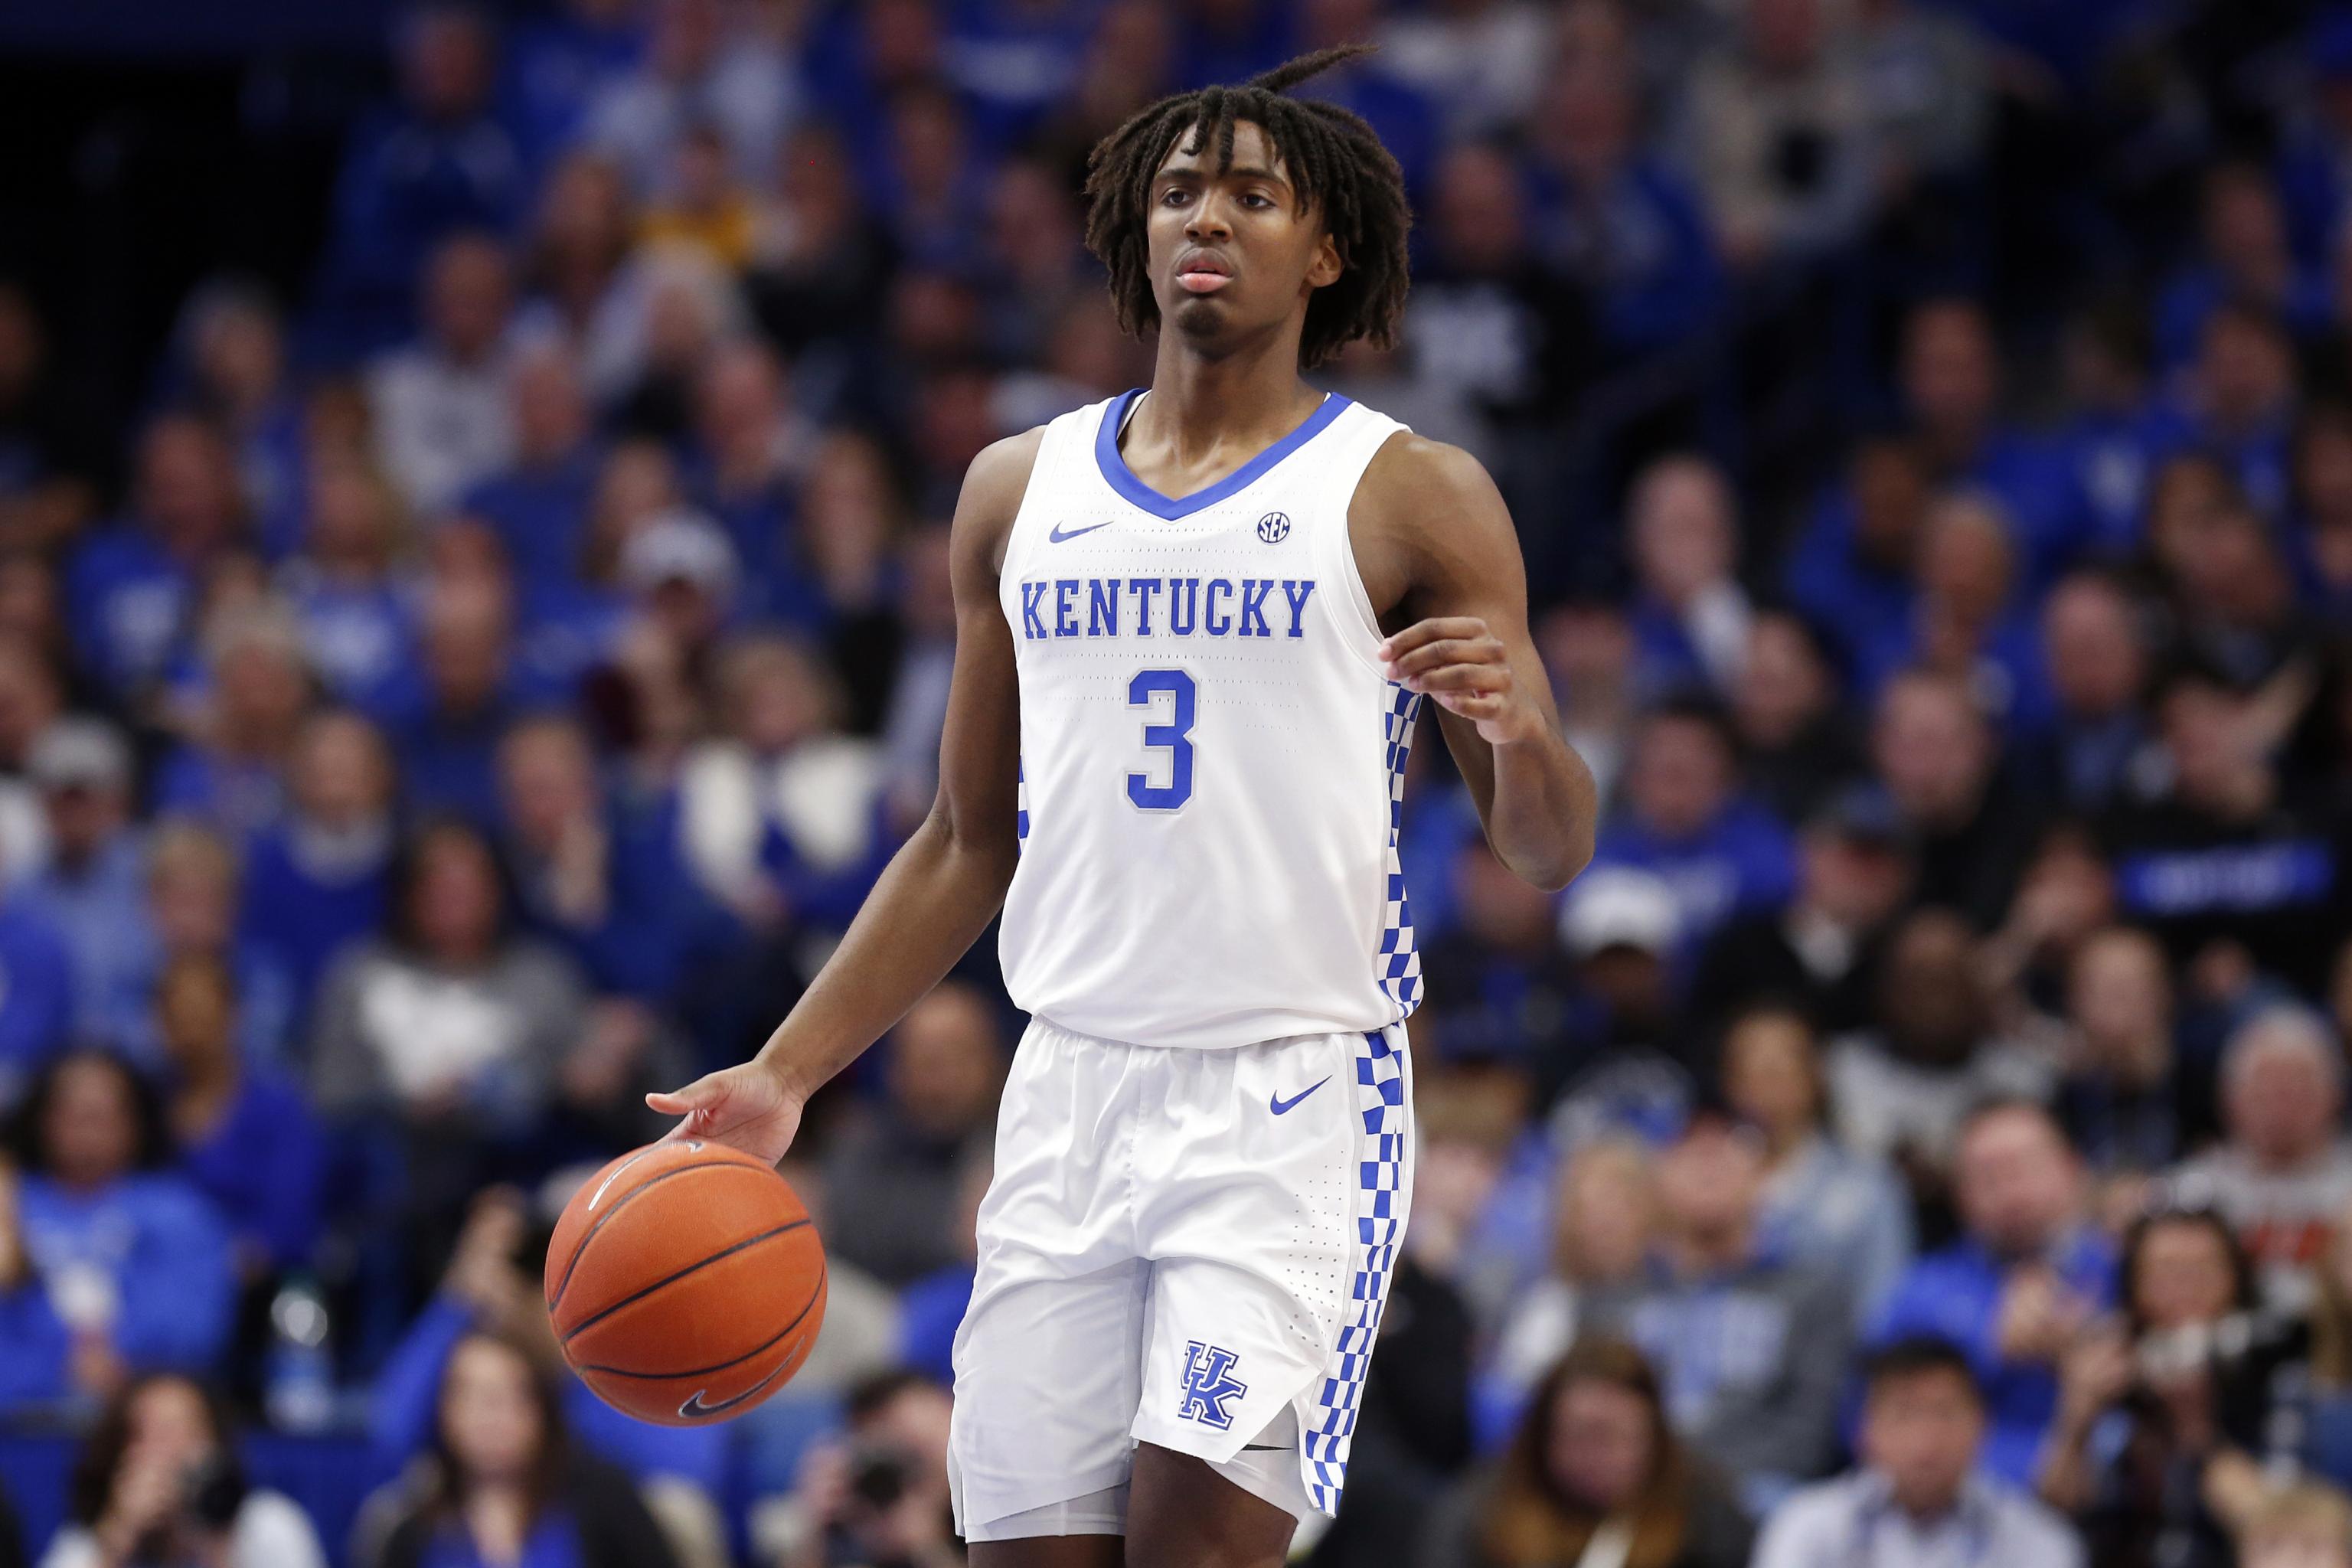 Tyrese Maxey, Immanuel Quickley taken in first round of NBA Draft